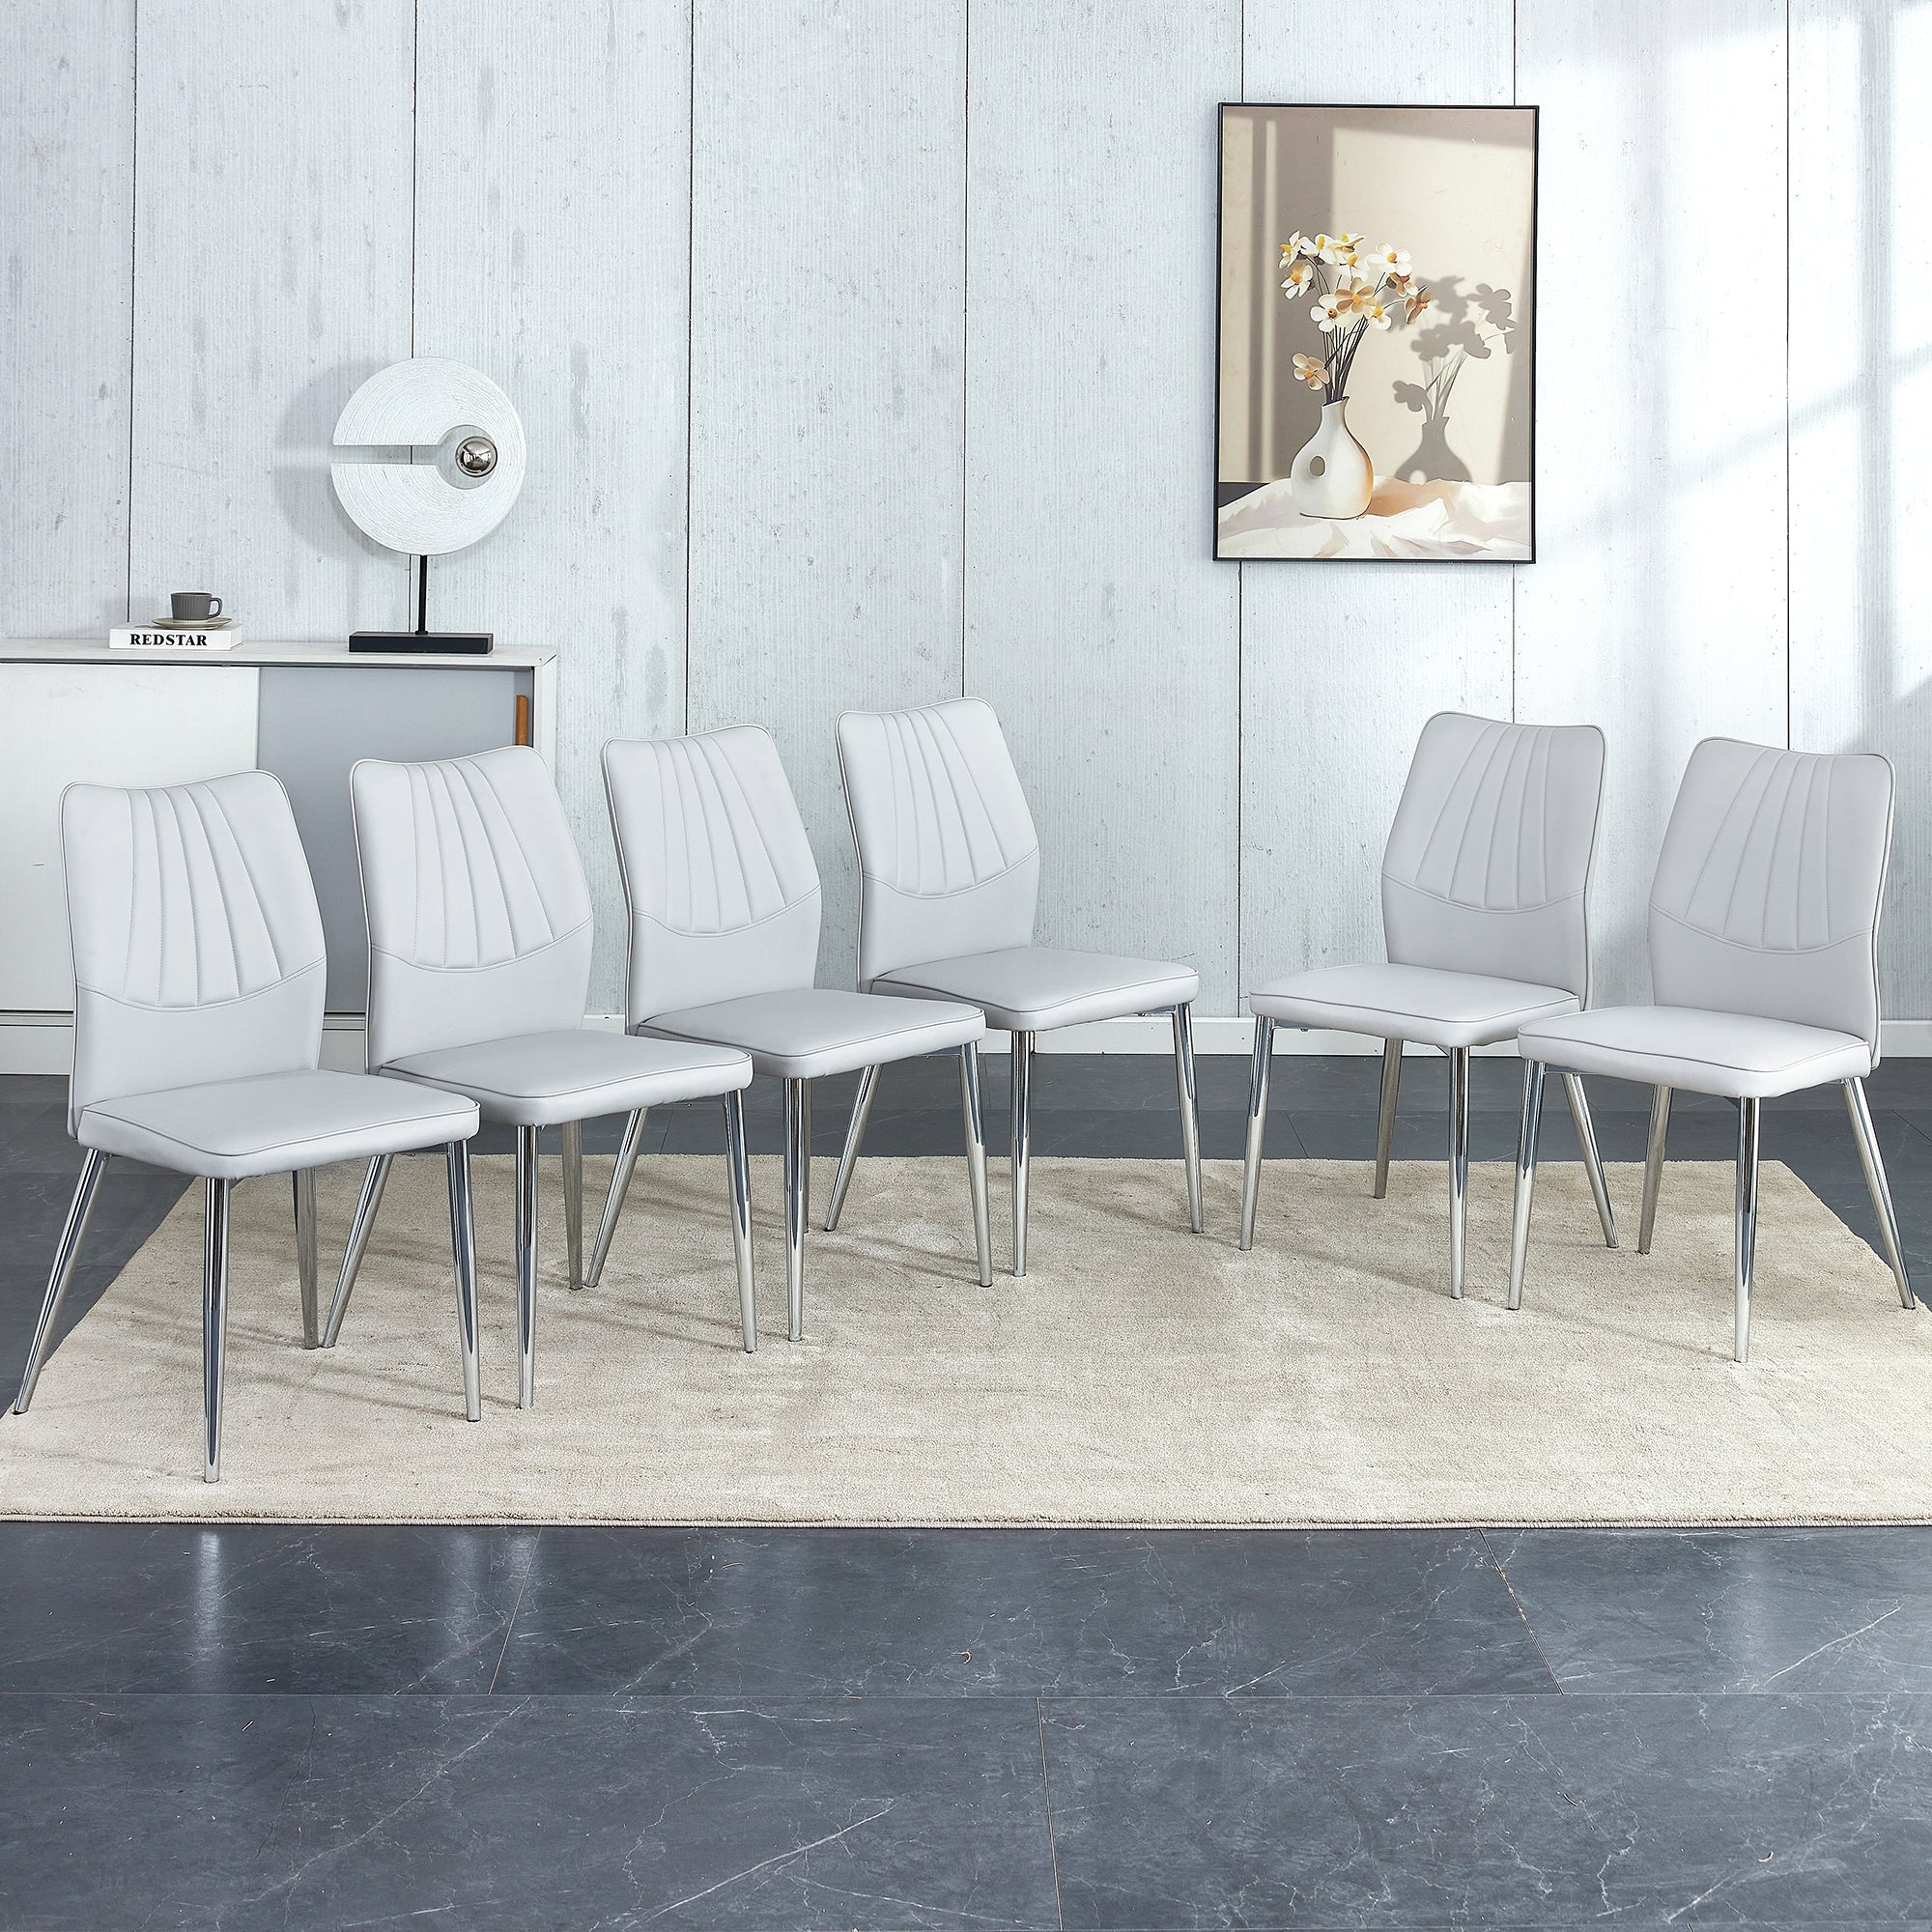 🆓🚛 6 Light Gray Dining Chairs Modern Chairs From The Middle Ages Made of Pu Material Cushion & Silver Metal Legs Suitable for Restaurants & Living Rooms C-009